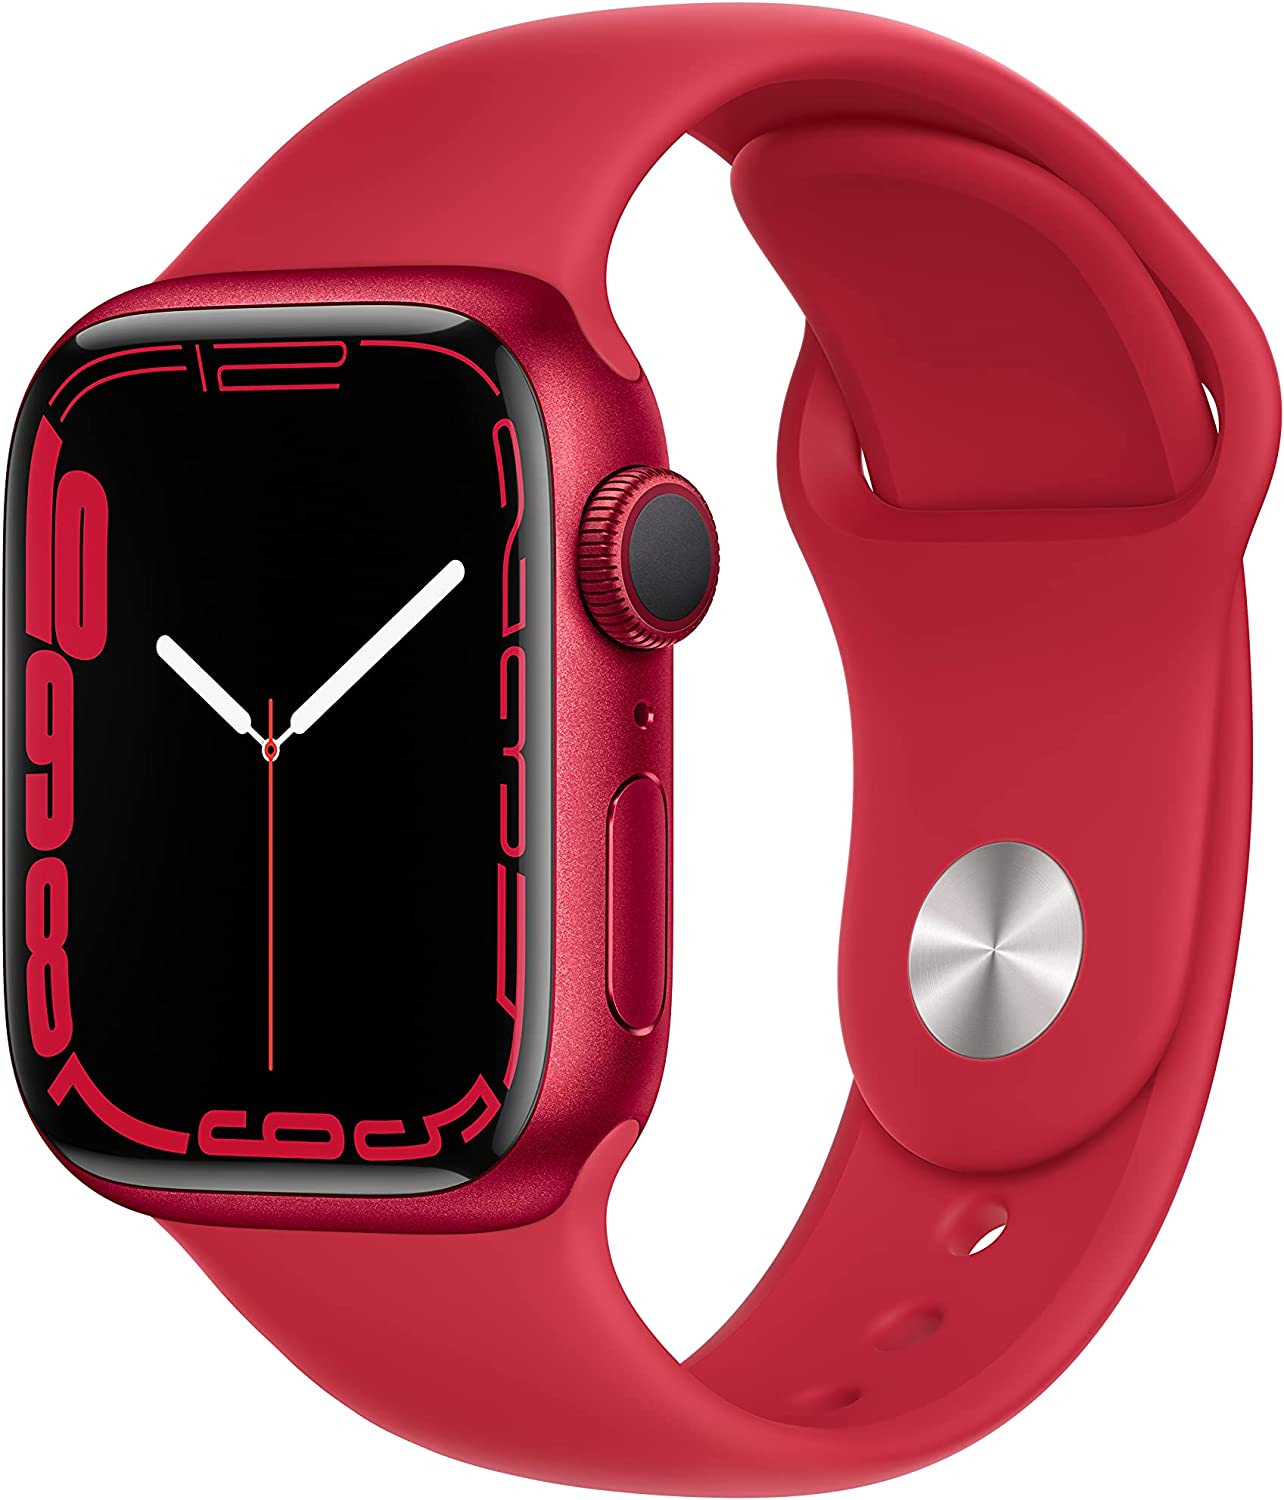 On October 15, the Apple Watch Series 7 will join the Apple Watch SE and Series 3 – here's how they compare